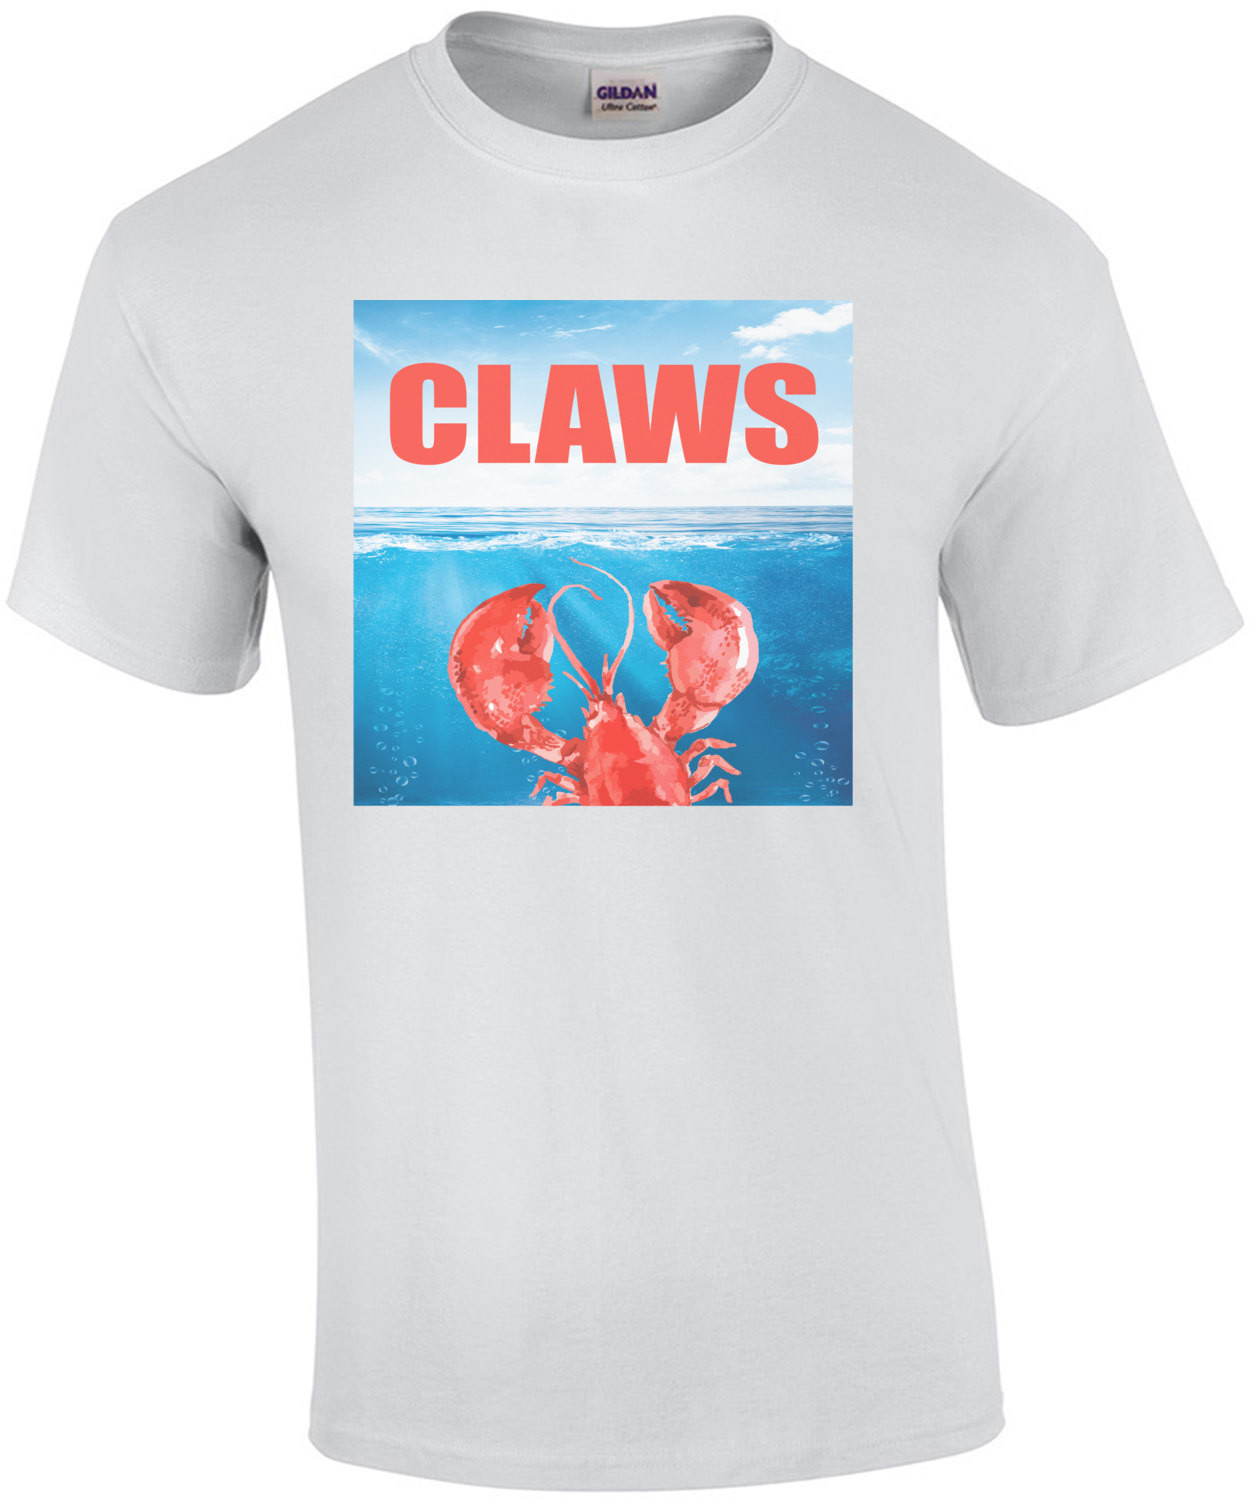 Claws - JAWS Parody. Funny lobster t-shirt. Maine t-shirt.